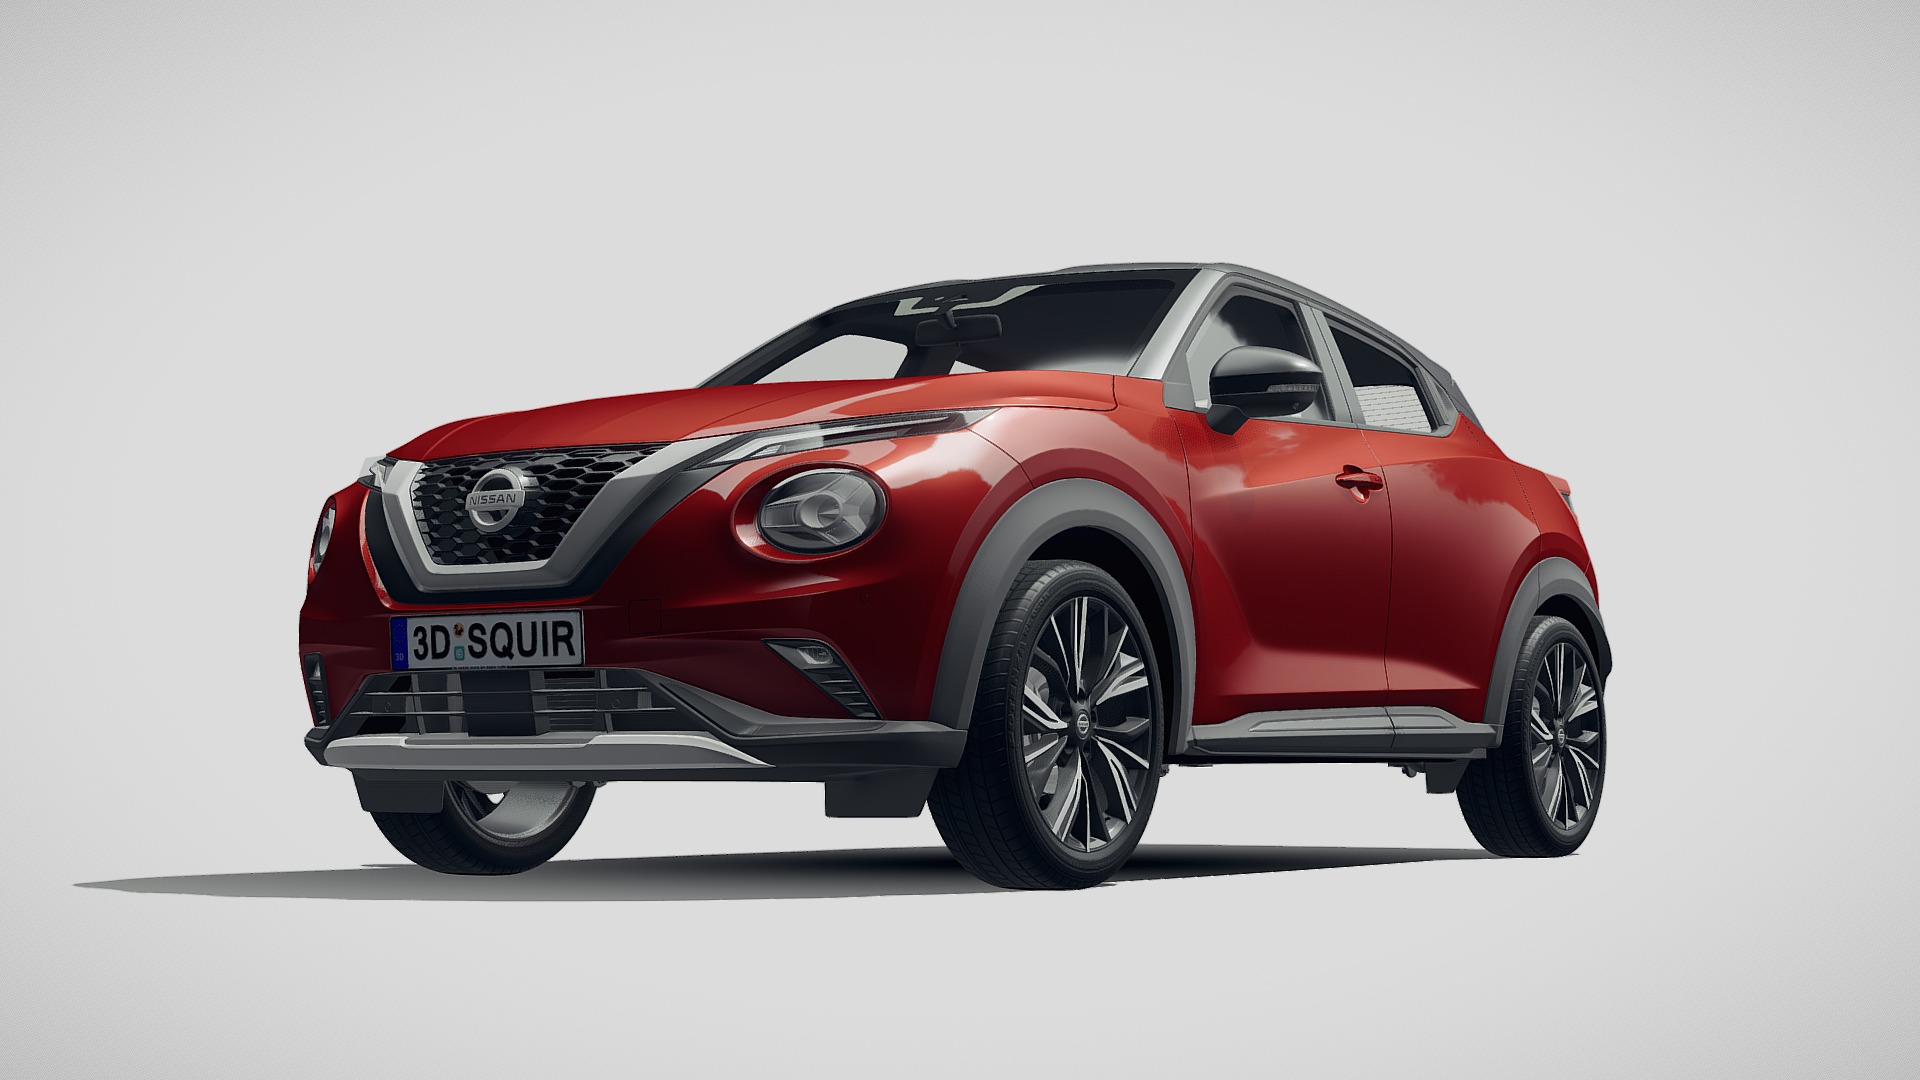 3D model Nissan Juke 2020 - This is a 3D model of the Nissan Juke 2020. The 3D model is about a red sports car.